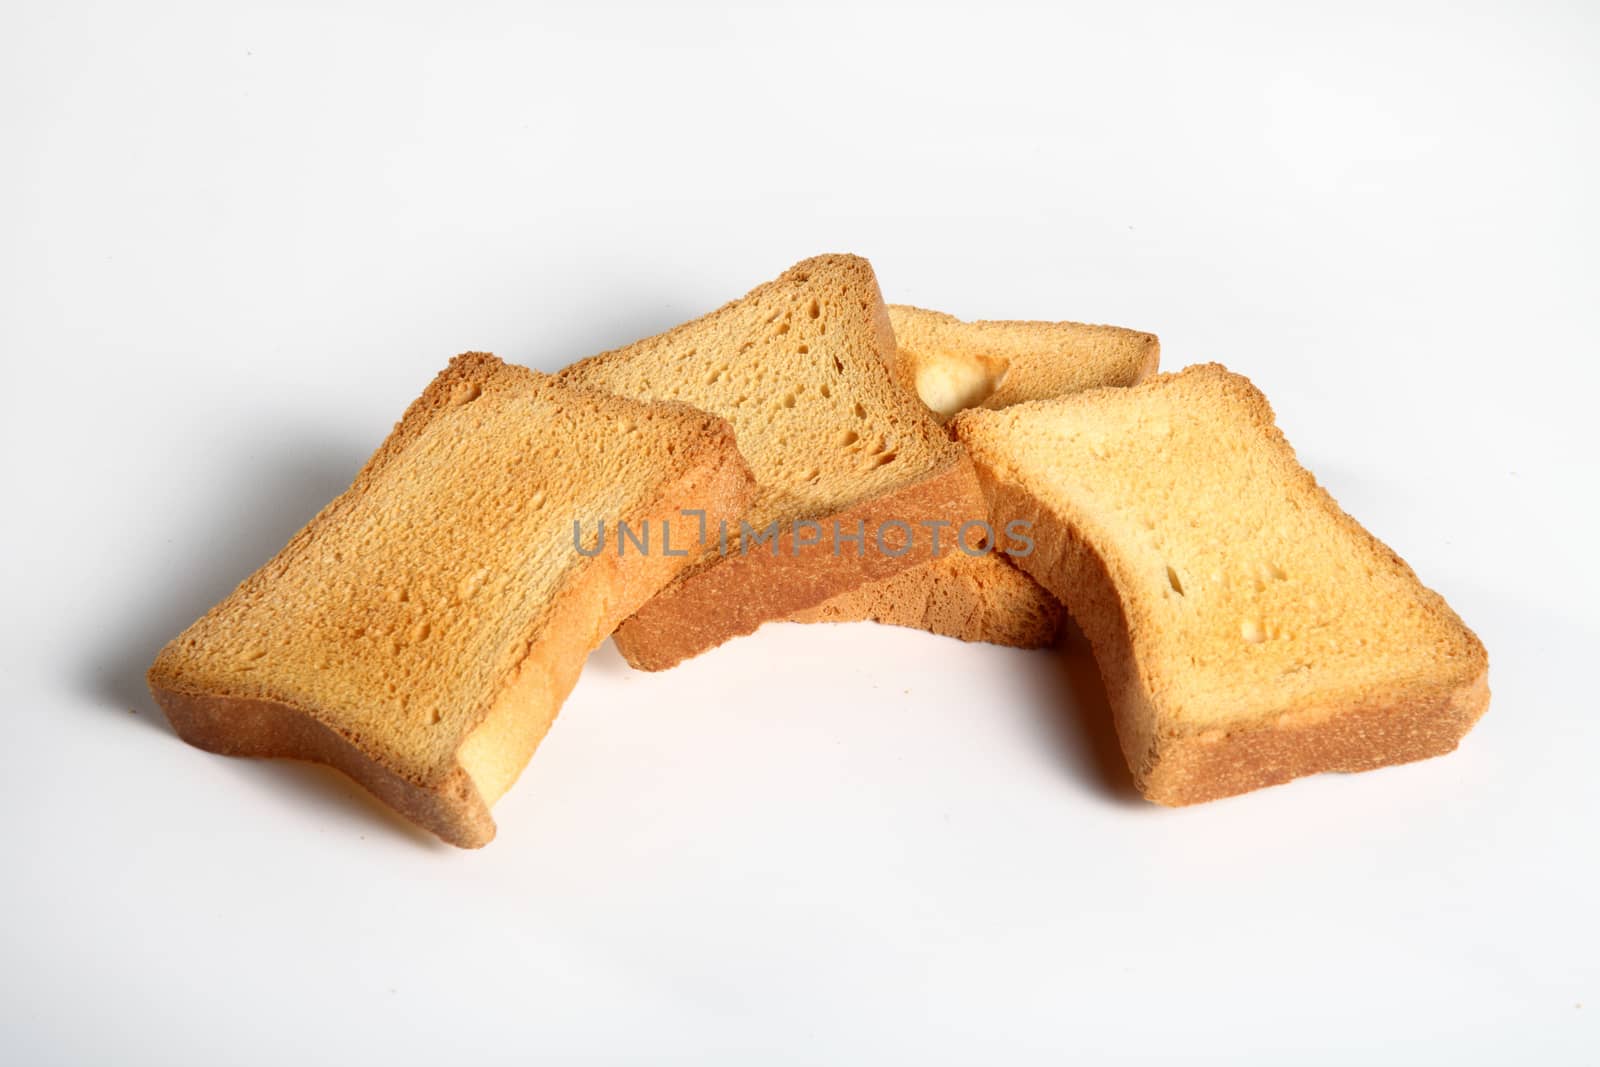 four slices toast viewed from above on a white background